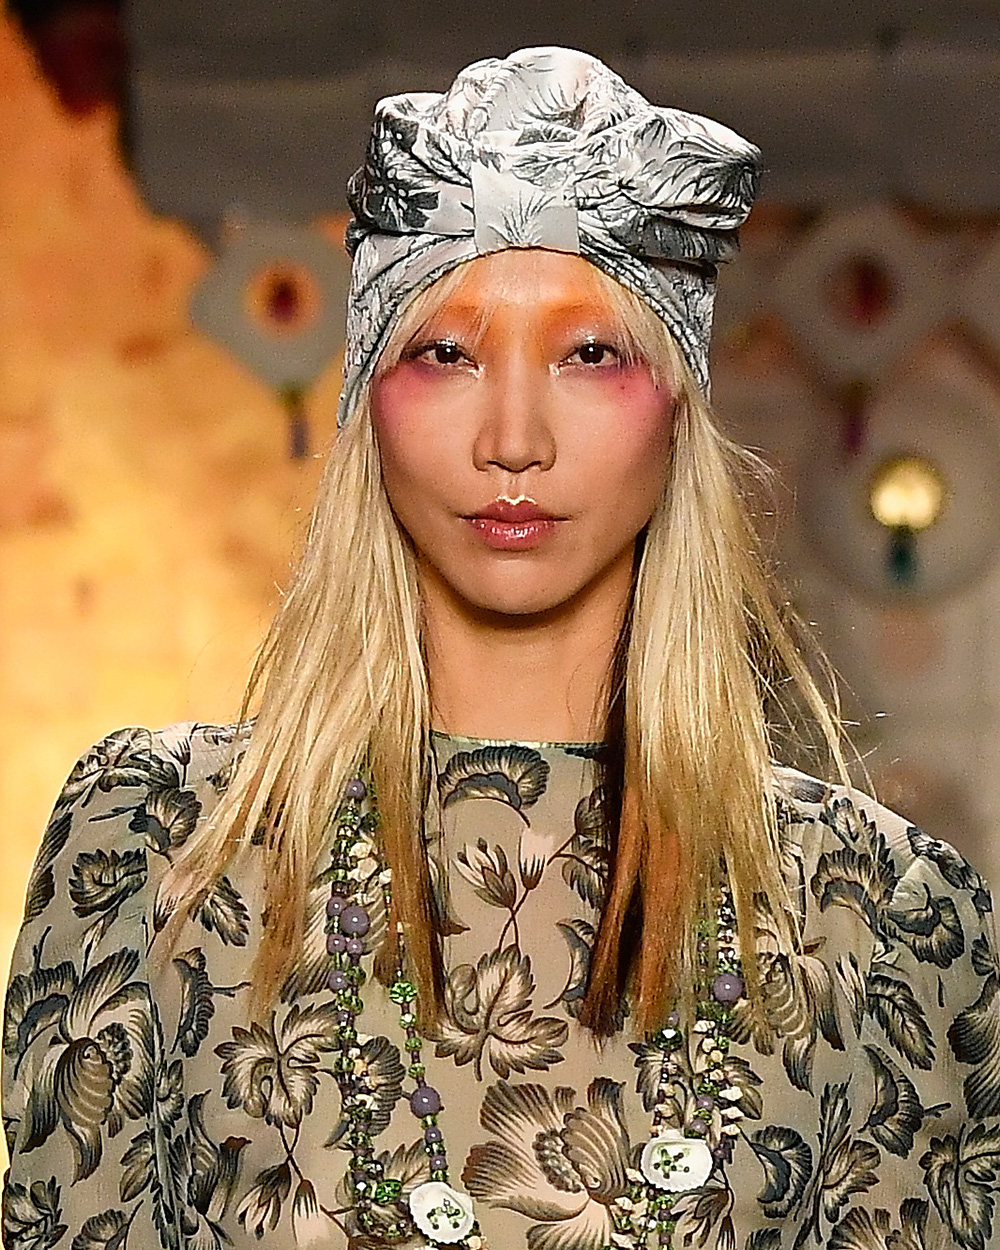 The best beauty looks from NYFW | Anna Sui Legendary make-up artist, Pat McGrath created rhubarb and custard delights on the Anna Sui runway with clouds of syrupy sweet hues buffed onto models' eyes, forehead and temples.